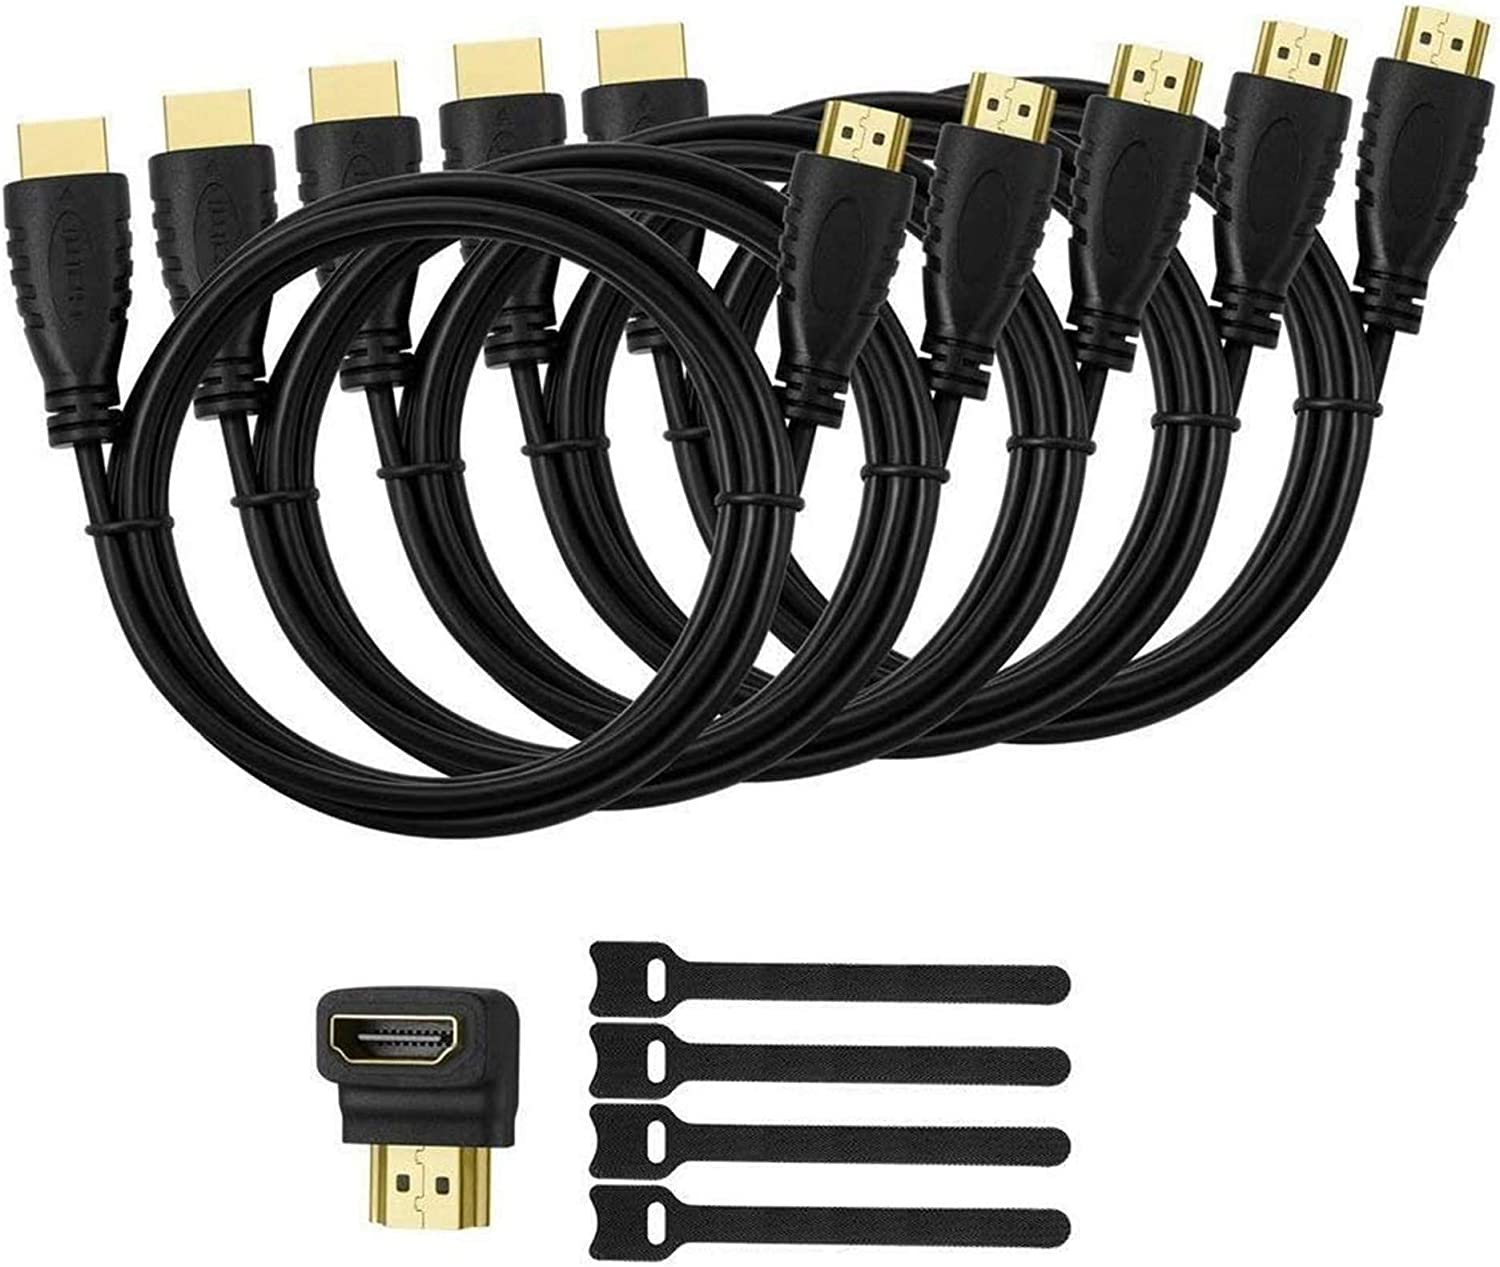 5 Pack High-Speed HDMI Cables-6ft with 90 Degree Adapter – Just $22.99 at Amazon